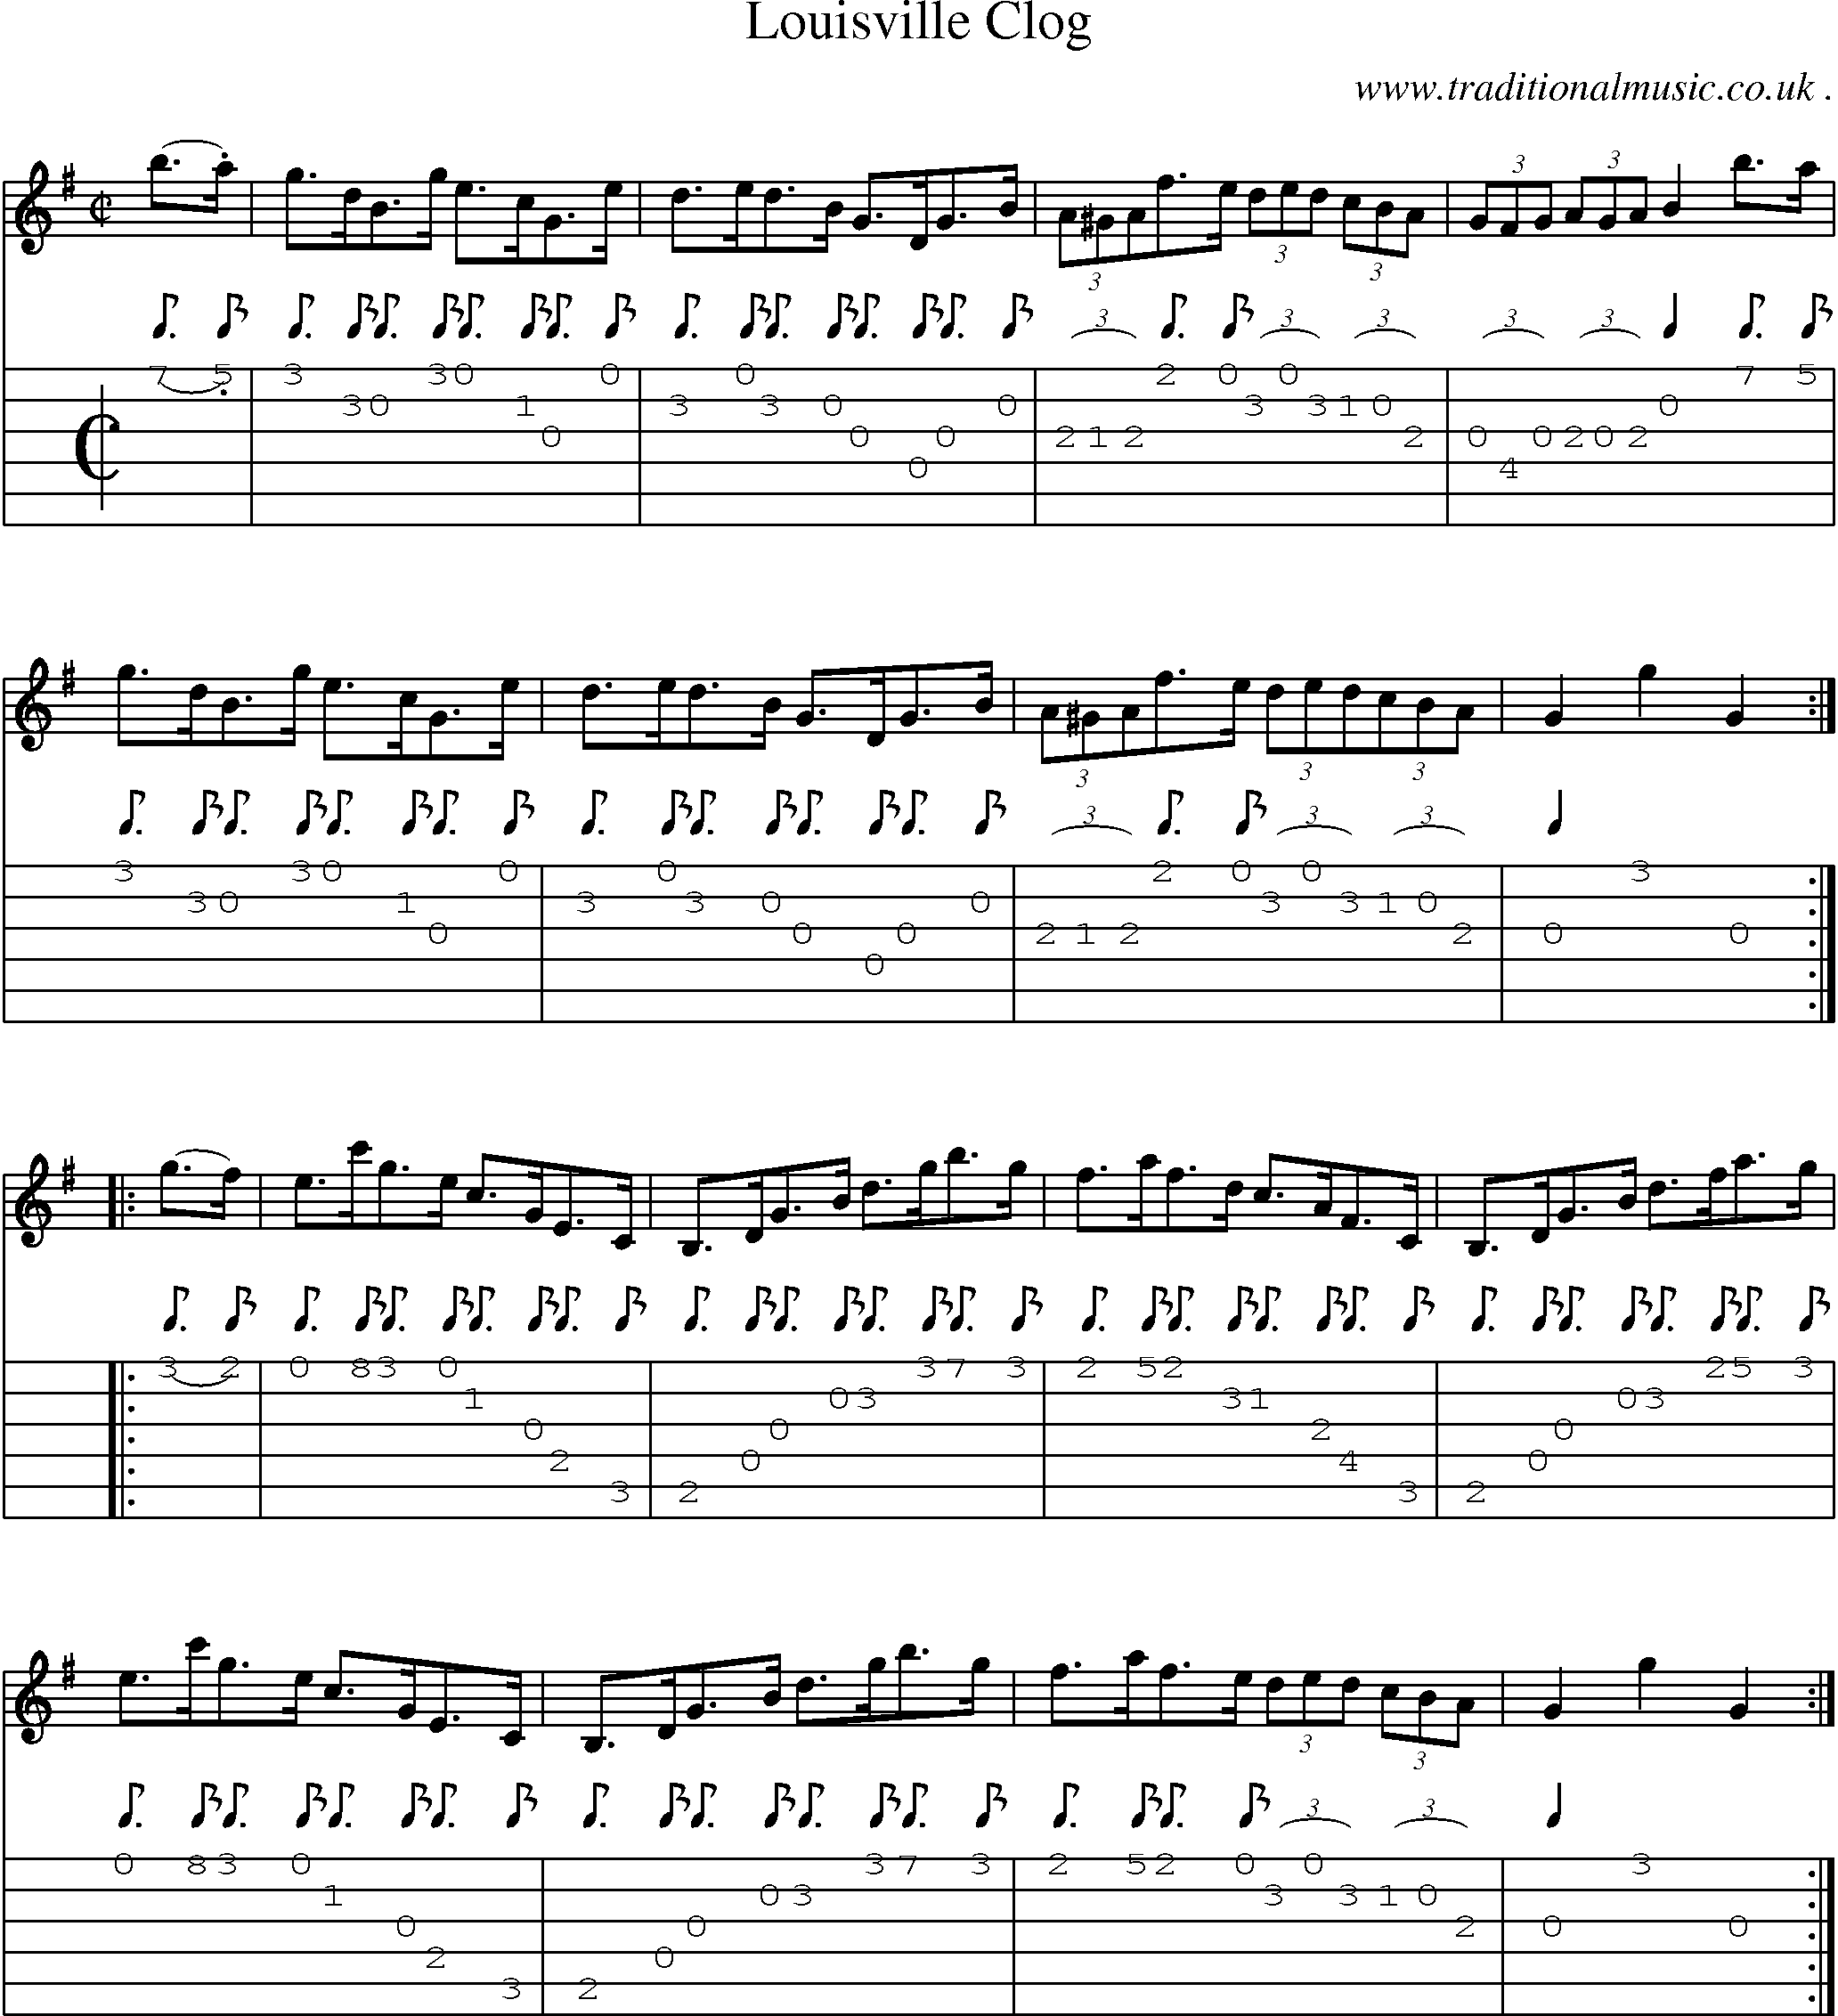 Sheet-Music and Guitar Tabs for Louisville Clog